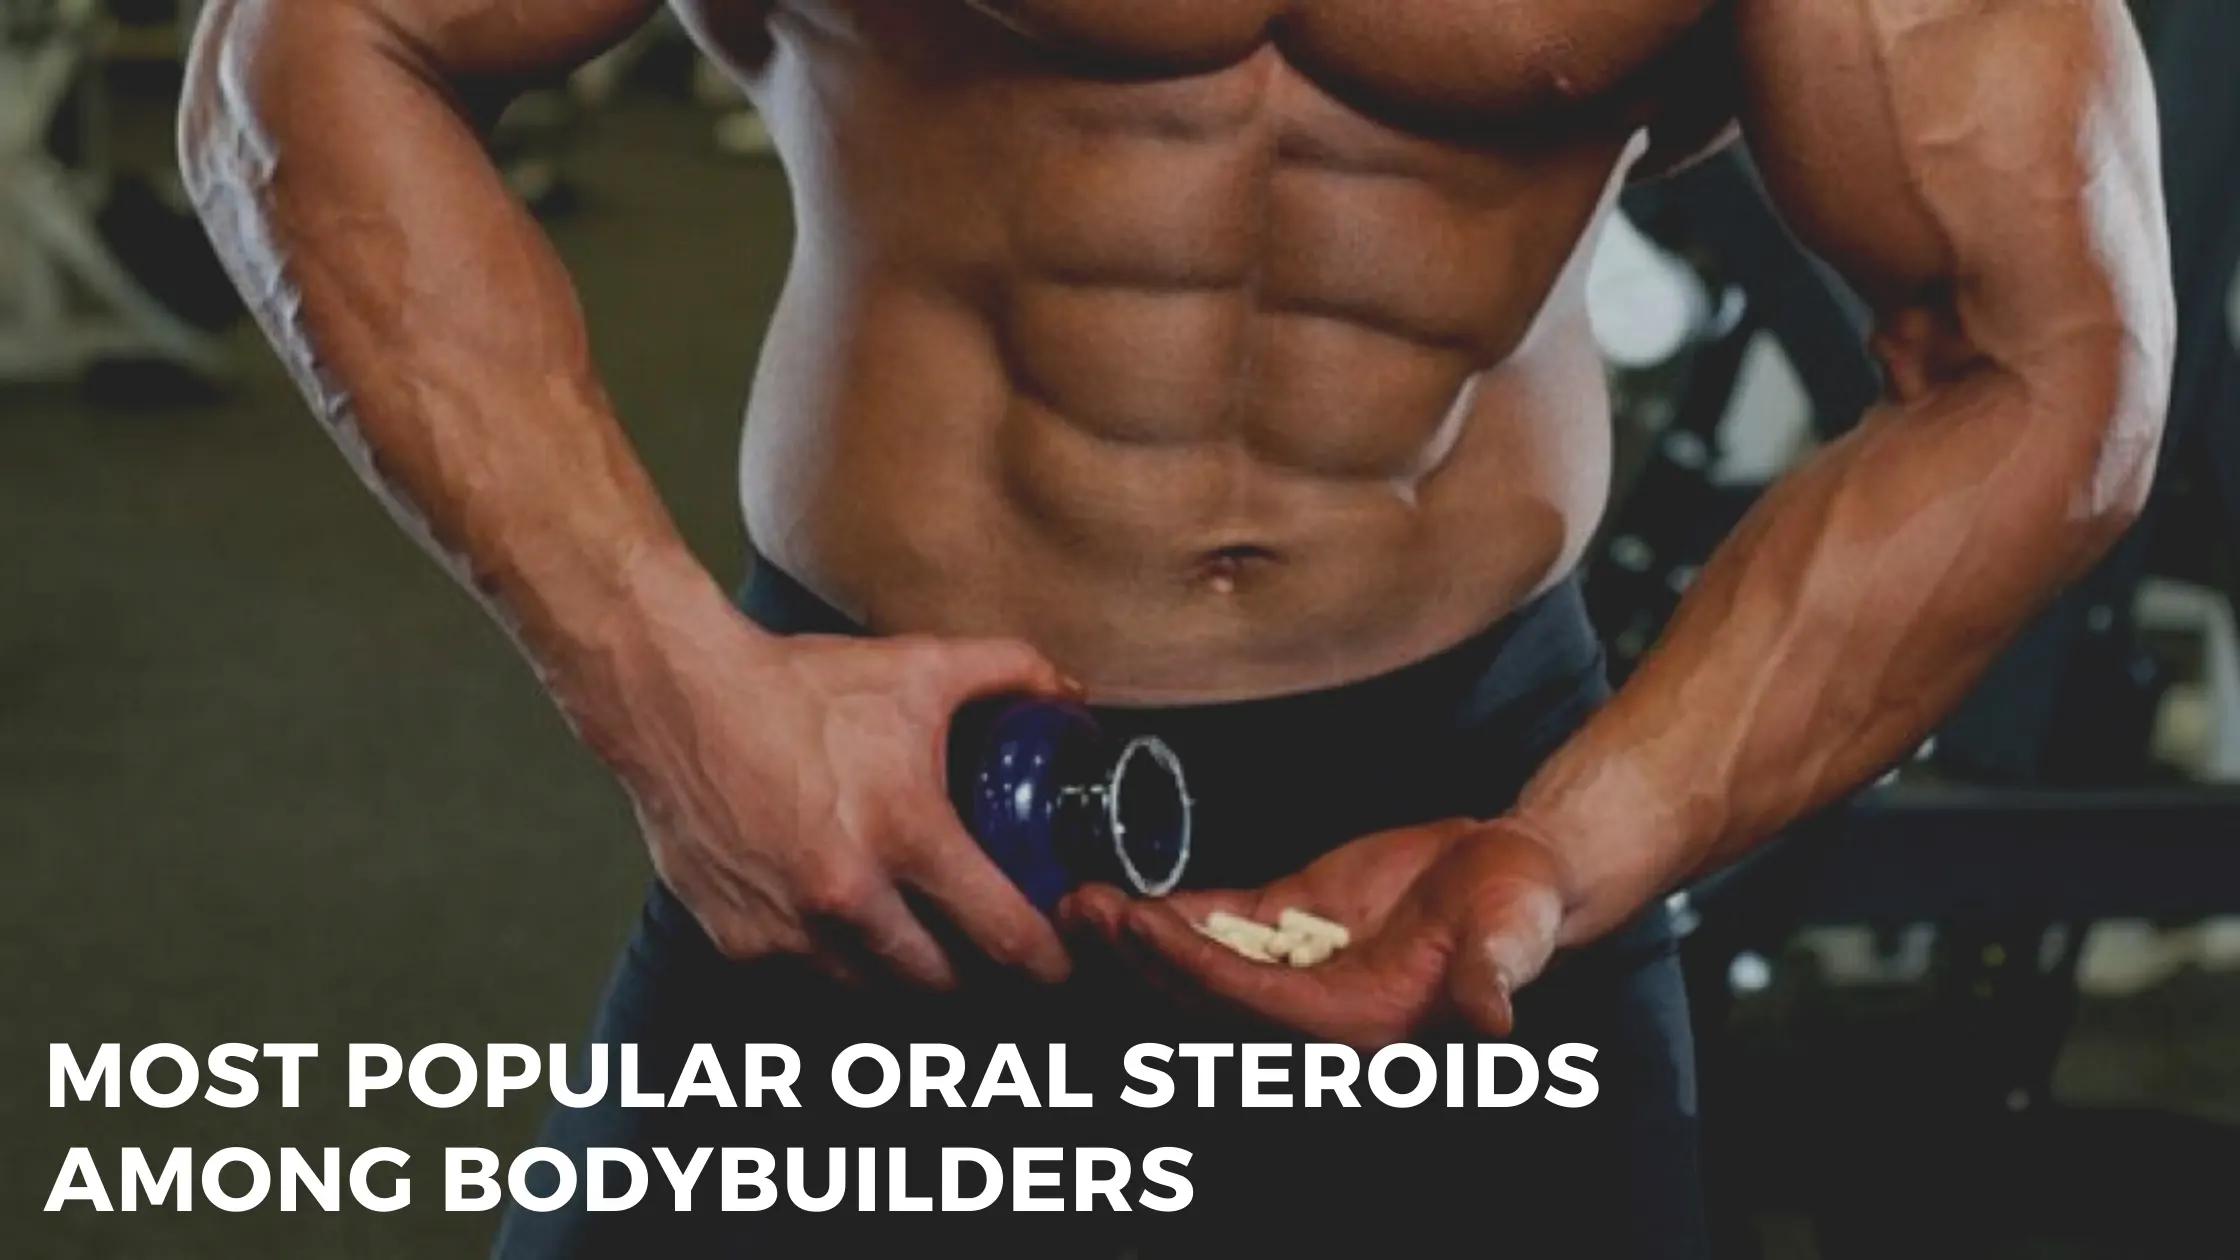 Most Popular Oral Steroids Among Bodybuilders